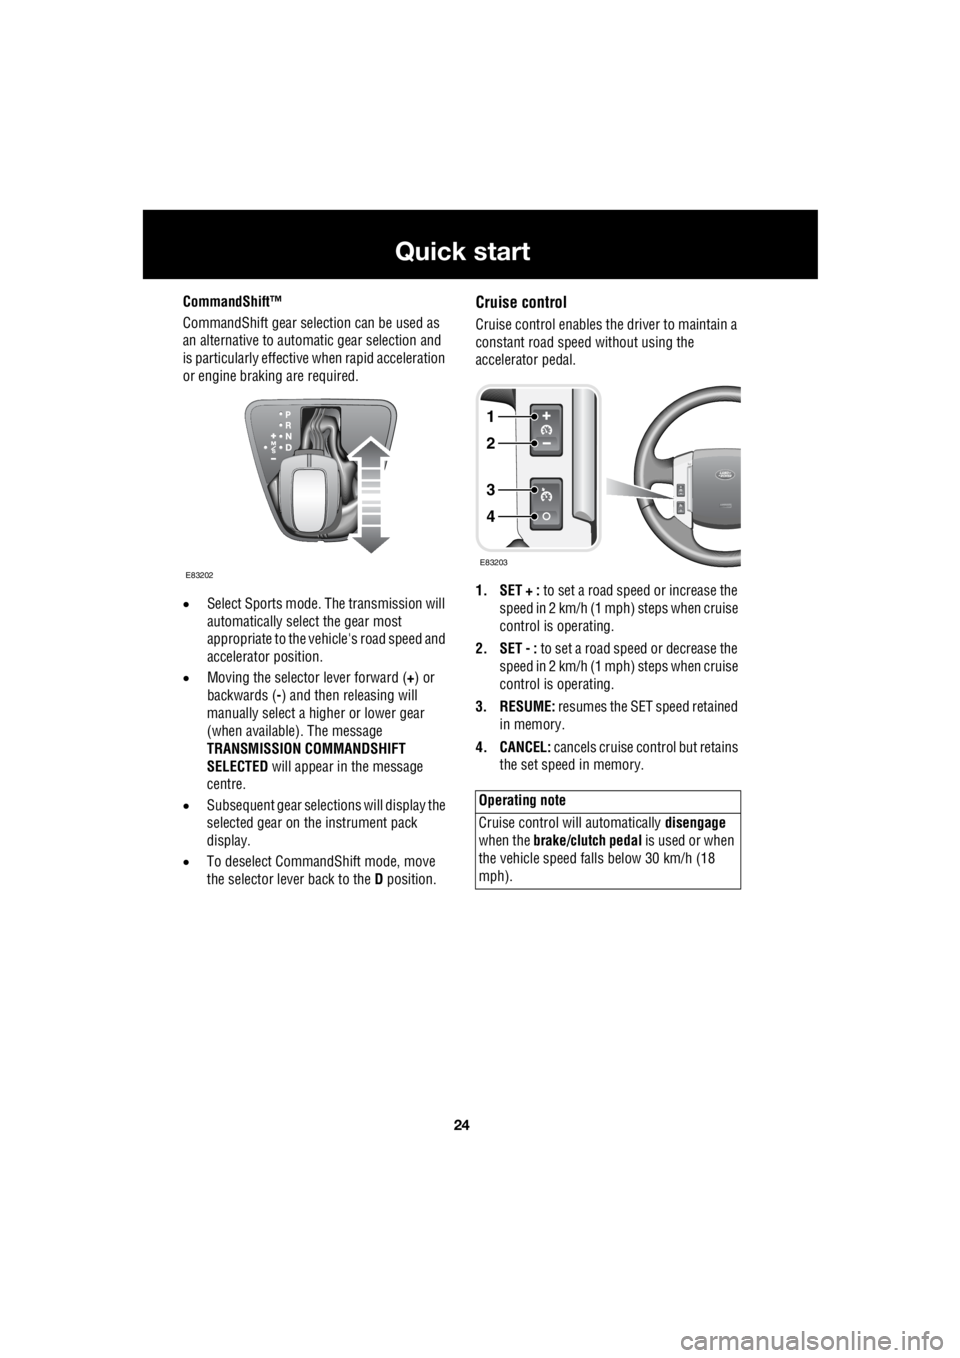 LAND ROVER FRELANDER 2 2006  Repair Manual 24
Quick start
L
CommandShift™ 
CommandShift gear sele  ction can be used as  
an alternative to automatic gear selection and  
is particularly   effective when rapid acceleration  
or engine brakin